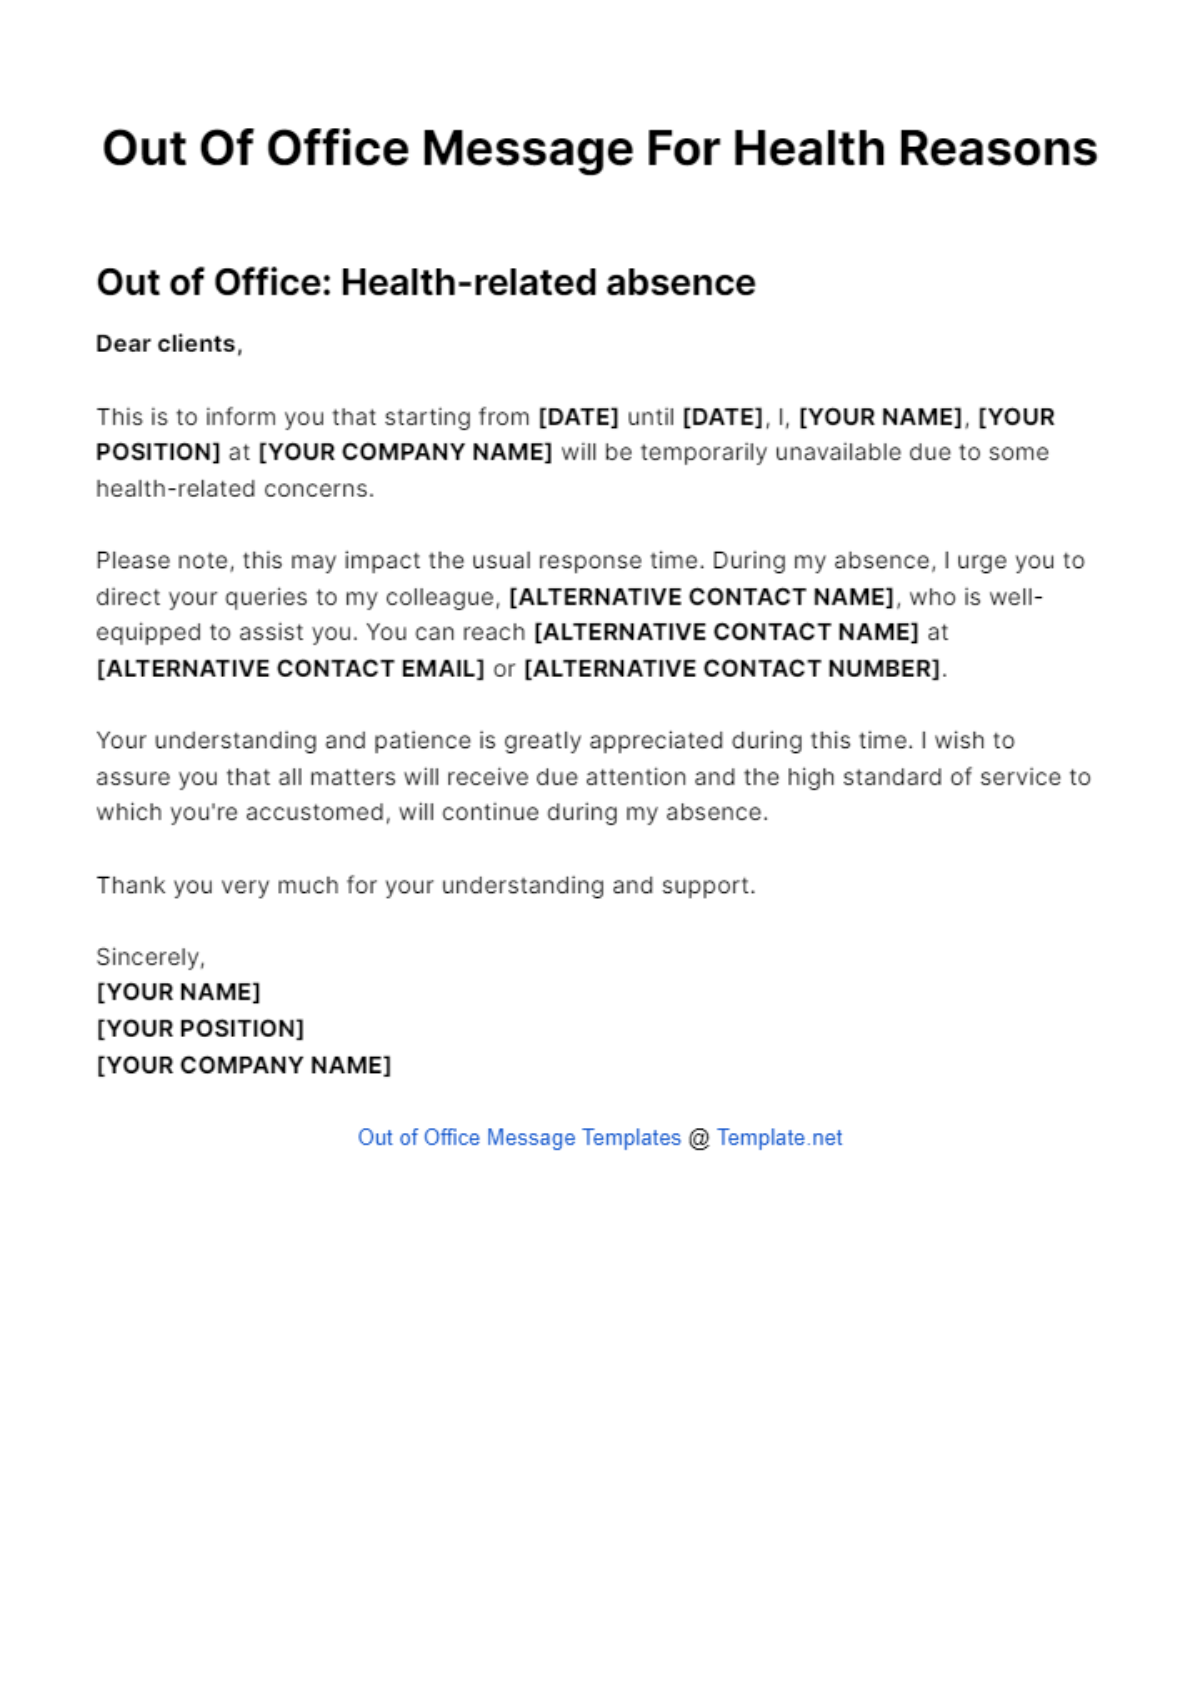 Out Of Office Message For Health Reasons Template